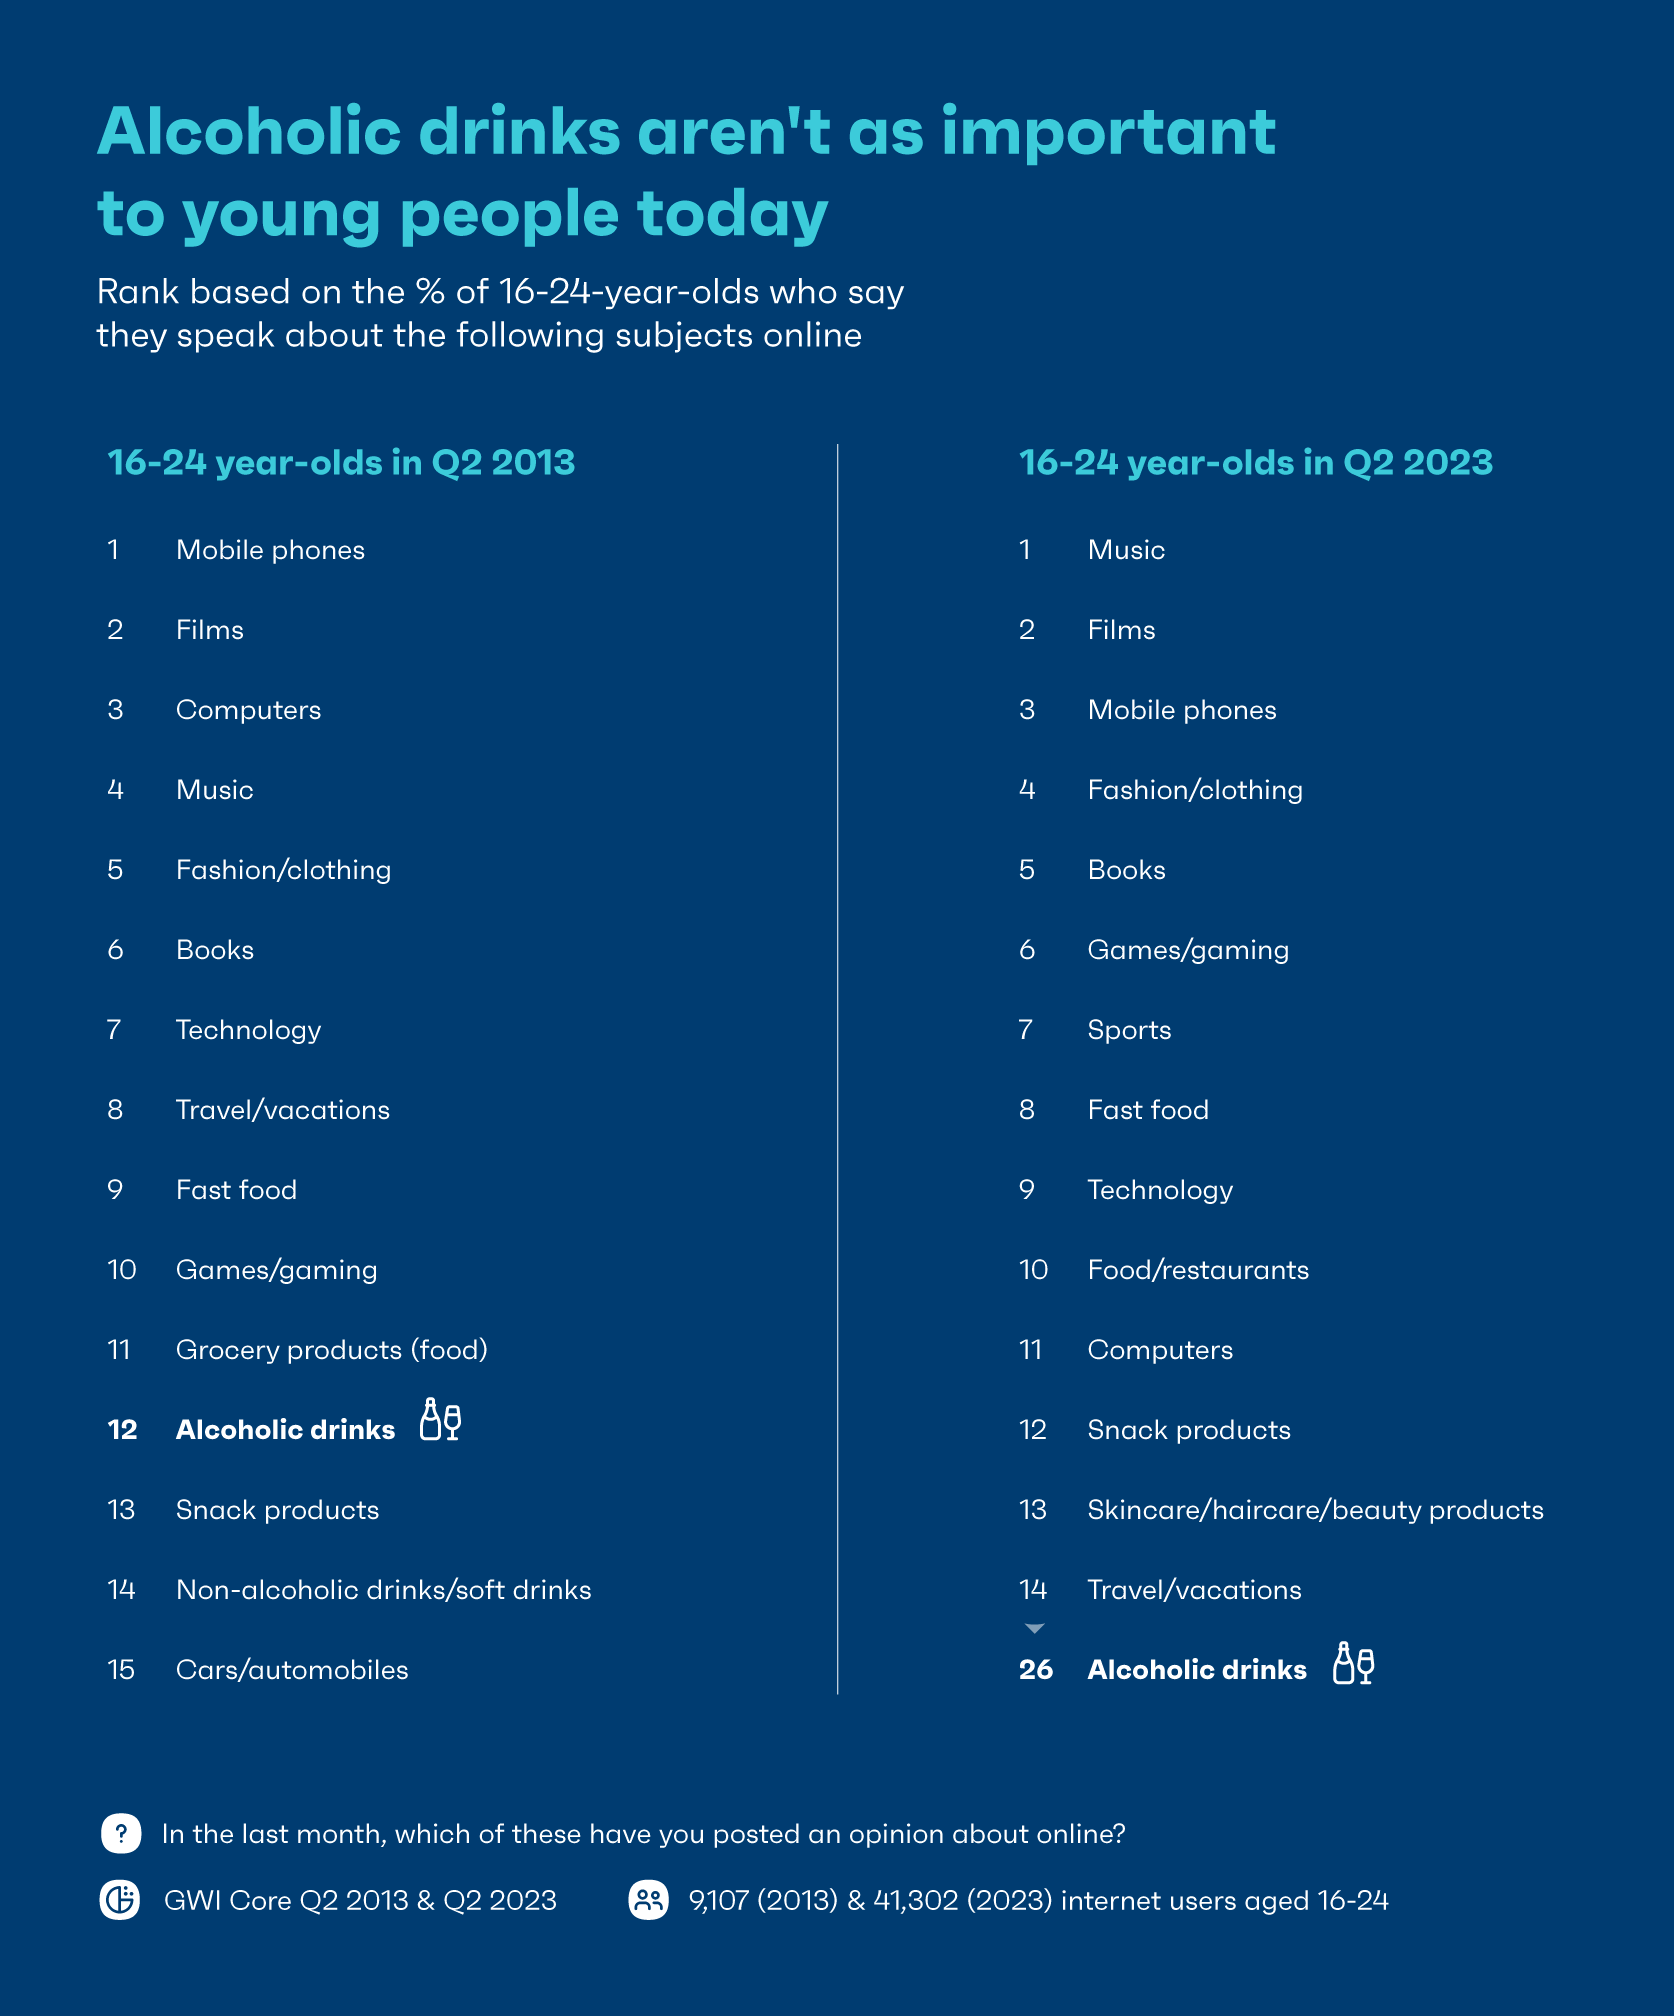 Chart showing what young people speak about online